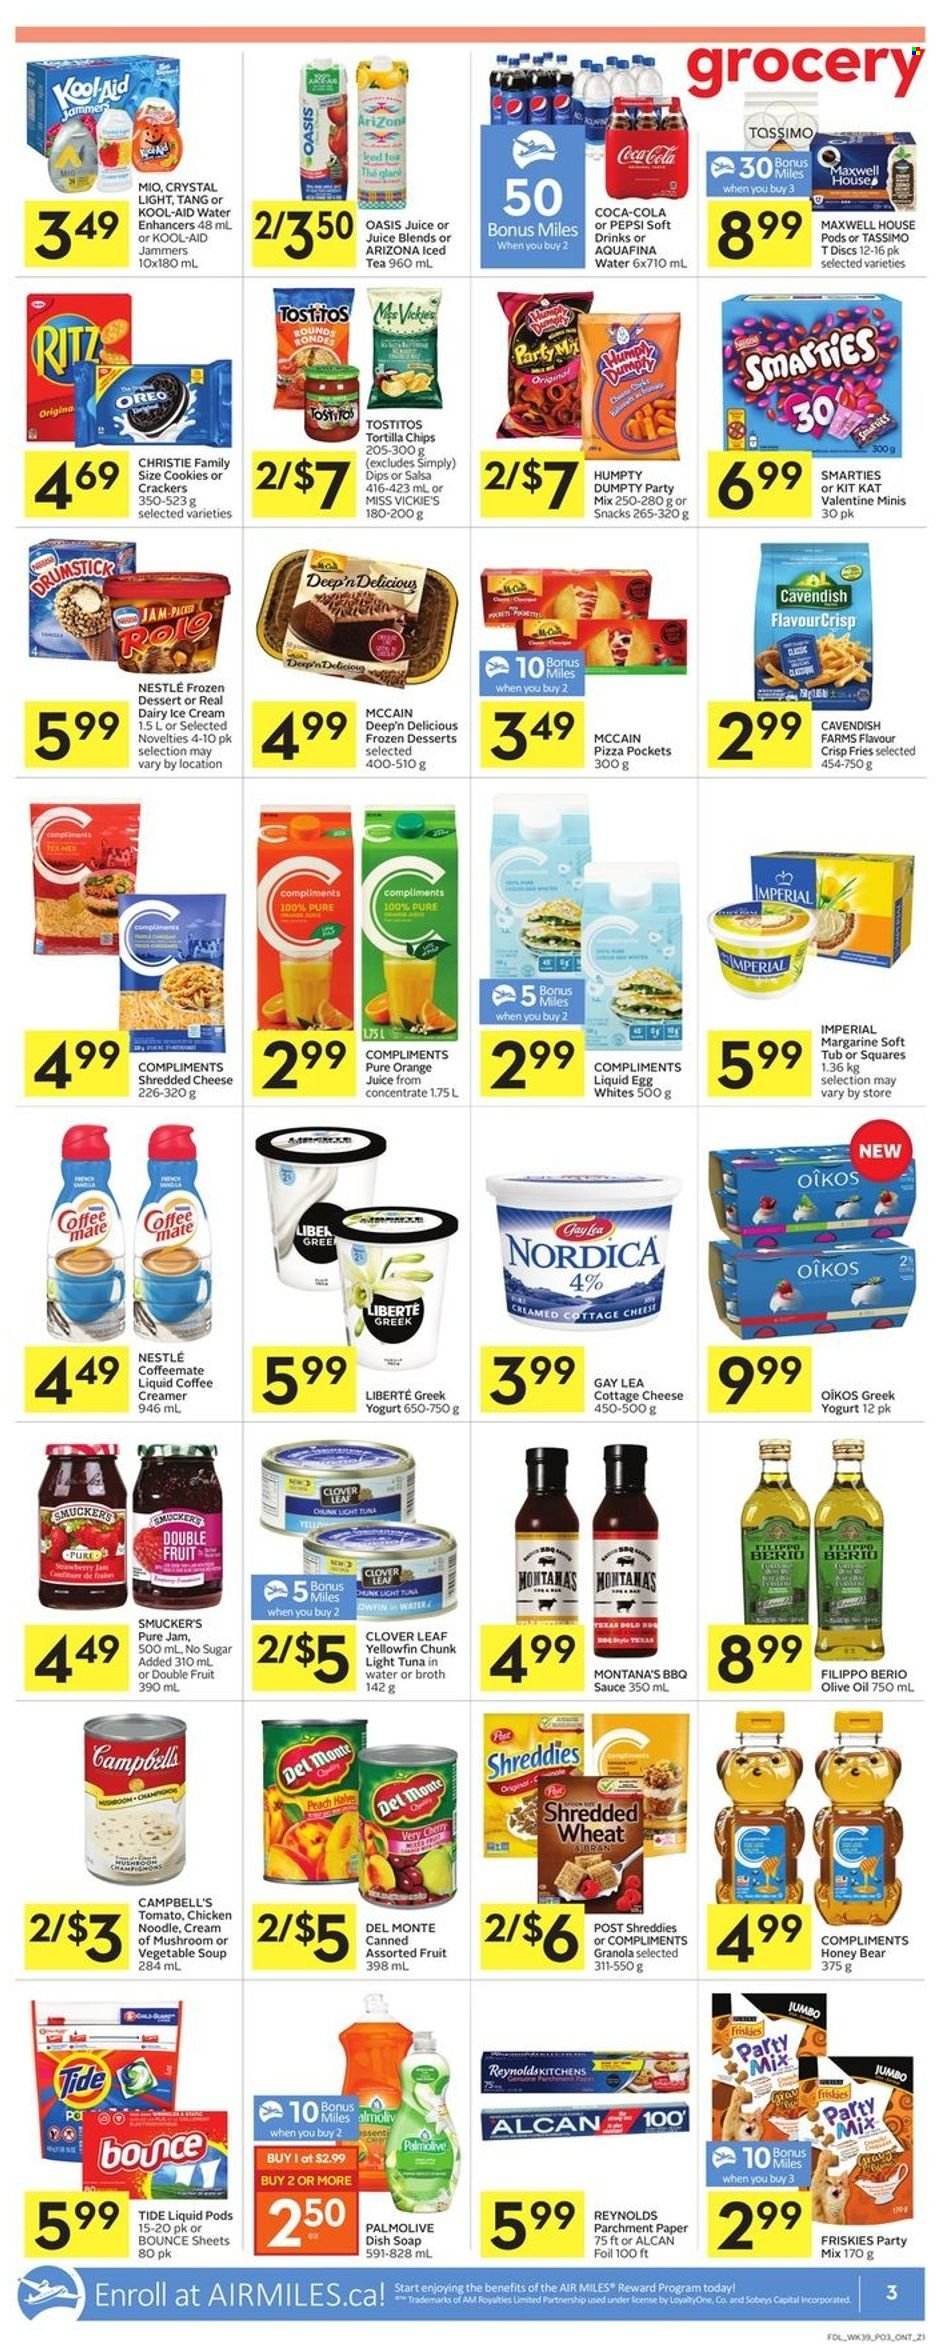 thumbnail - Foodland Flyer - January 20, 2022 - January 26, 2022 - Sales products - tuna, Campbell's, vegetable soup, pizza, soup, sauce, noodles, cottage cheese, shredded cheese, greek yoghurt, yoghurt, Clover, Oikos, Coffee-Mate, eggs, margarine, creamer, ice cream, McCain, potato fries, cookies, KitKat, crackers, RITZ, tortilla chips, Tostitos, broth, tuna in water, light tuna, BBQ sauce, salsa, olive oil, oil, honey, fruit jam, Coca-Cola, Pepsi, orange juice, juice, ice tea, soft drink, AriZona, Aquafina, Maxwell House, L'Or, Oreo, Nestlé, granola, Smarties. Page 5.